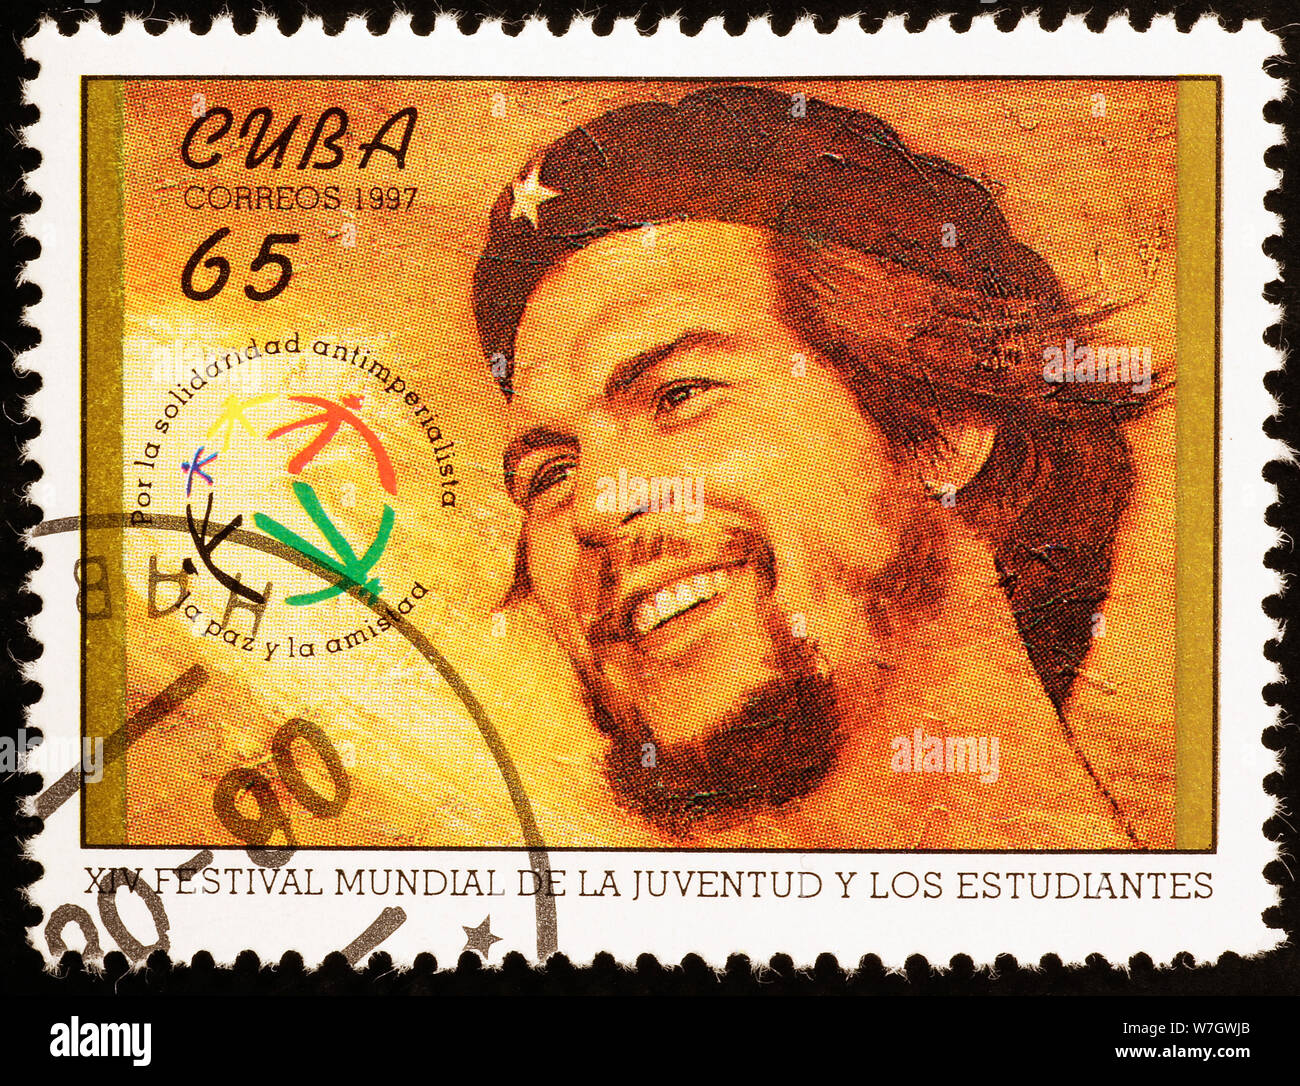 Che Guevara on cuban postage stamp Stock Photo